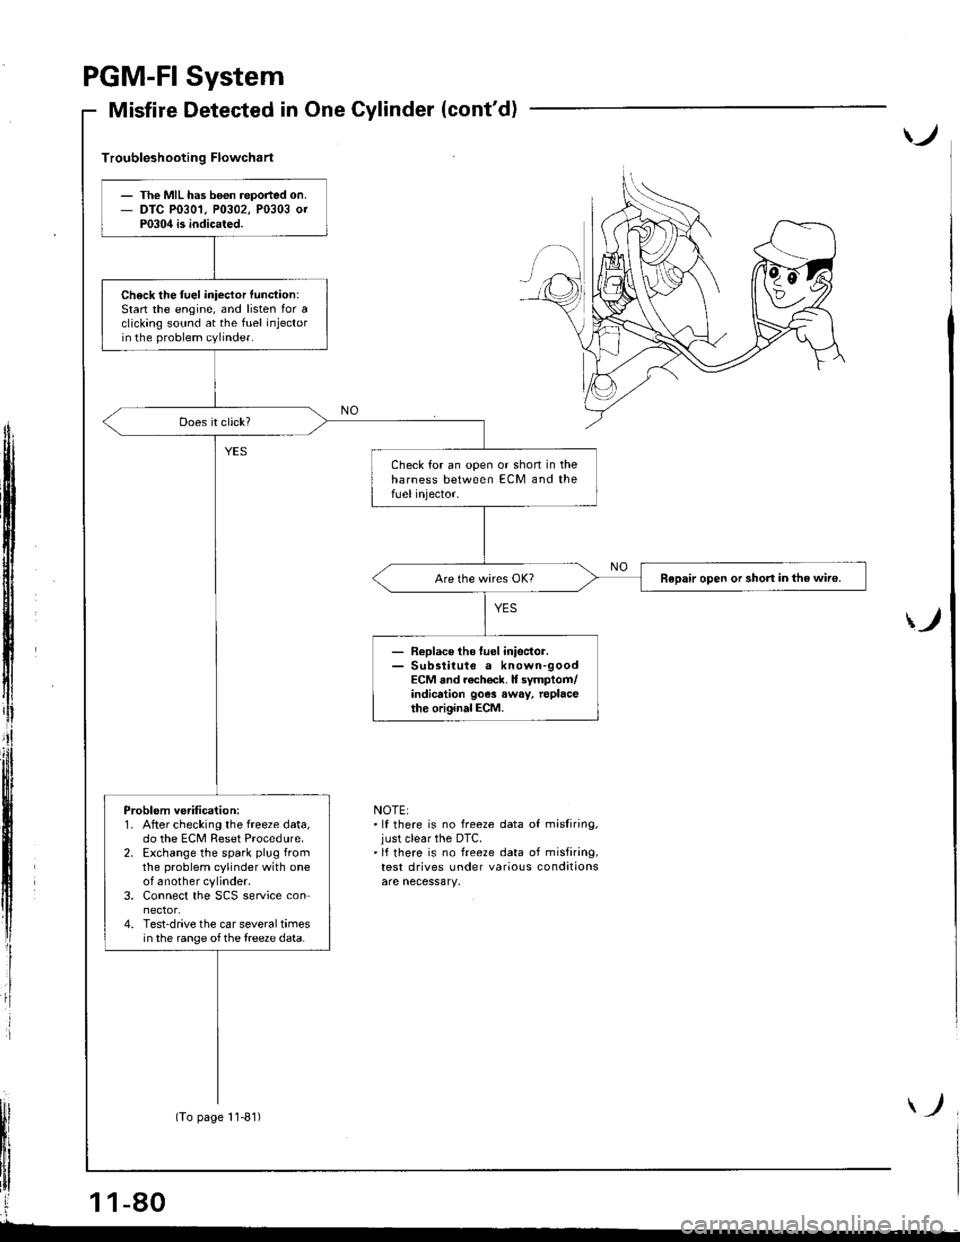 HONDA INTEGRA 1998 4.G Workshop Manual PGM.FI
Misfire
System
Detected in One Cylinder (contd)
)
Troubleshooting Flowchart
ff
i
)
NOTE:.lf there is no freeze data of misliring,just clear the DTC.lf there is no freeze data of misfiring,tes